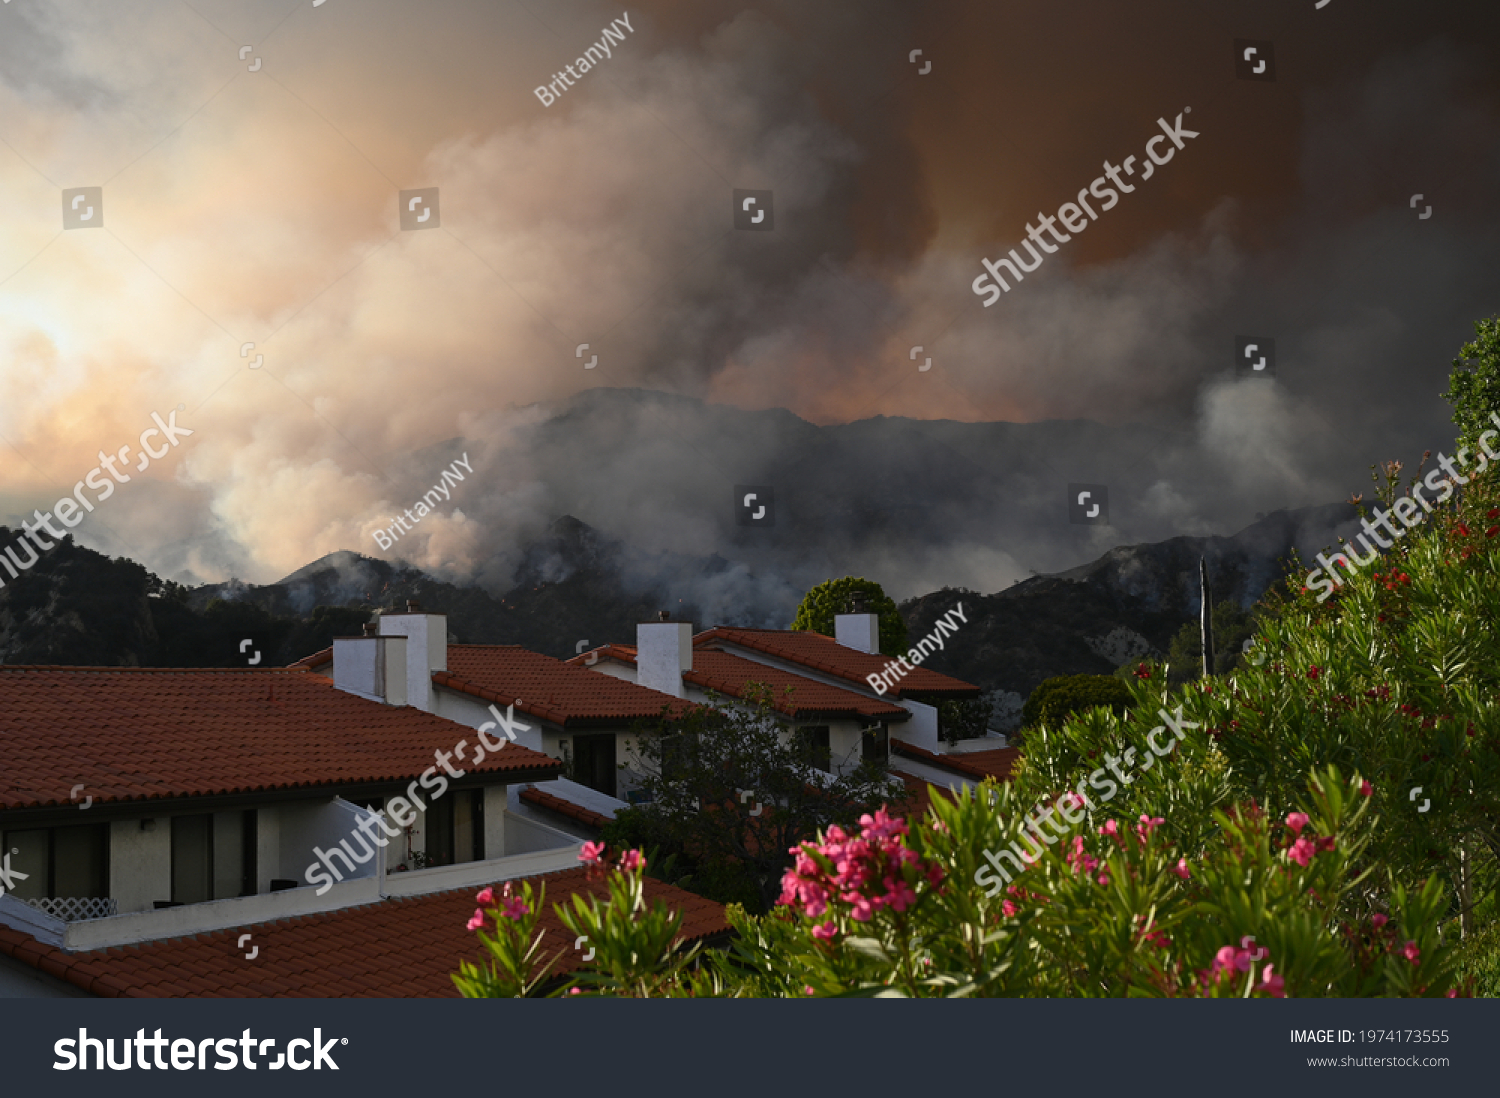 Pacific Palisades brush fire, California brush fire, 05.15.2021, wildfire, nature disaster #1974173555